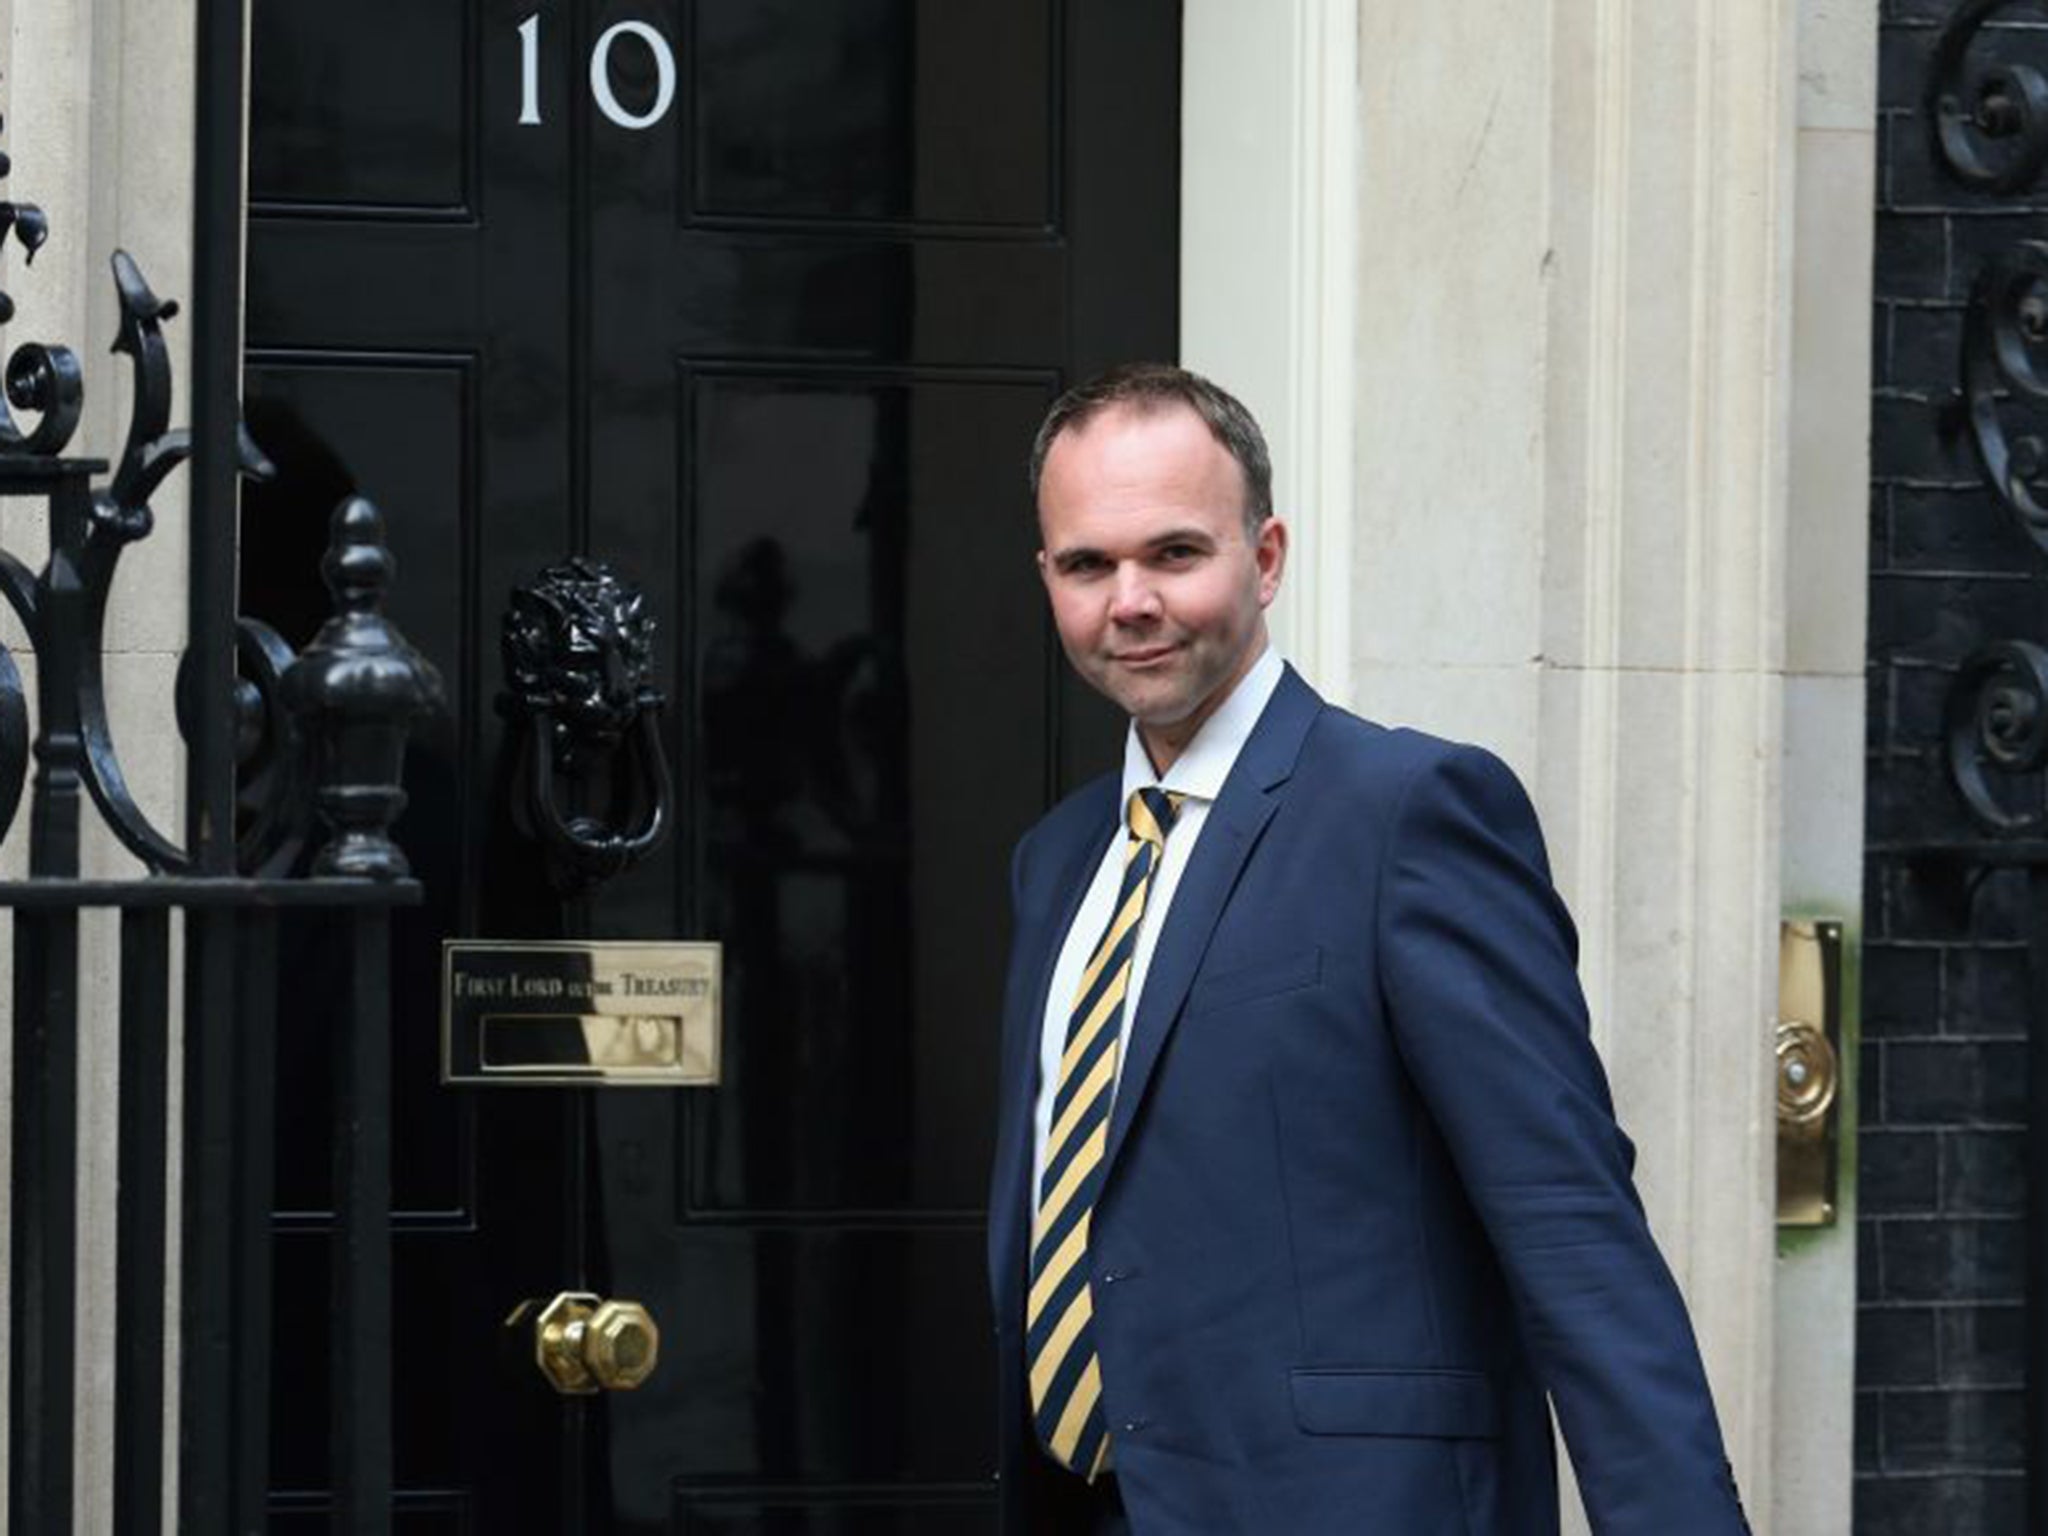 Gavin Barwell, MP for Central Croydon and Housing Minister